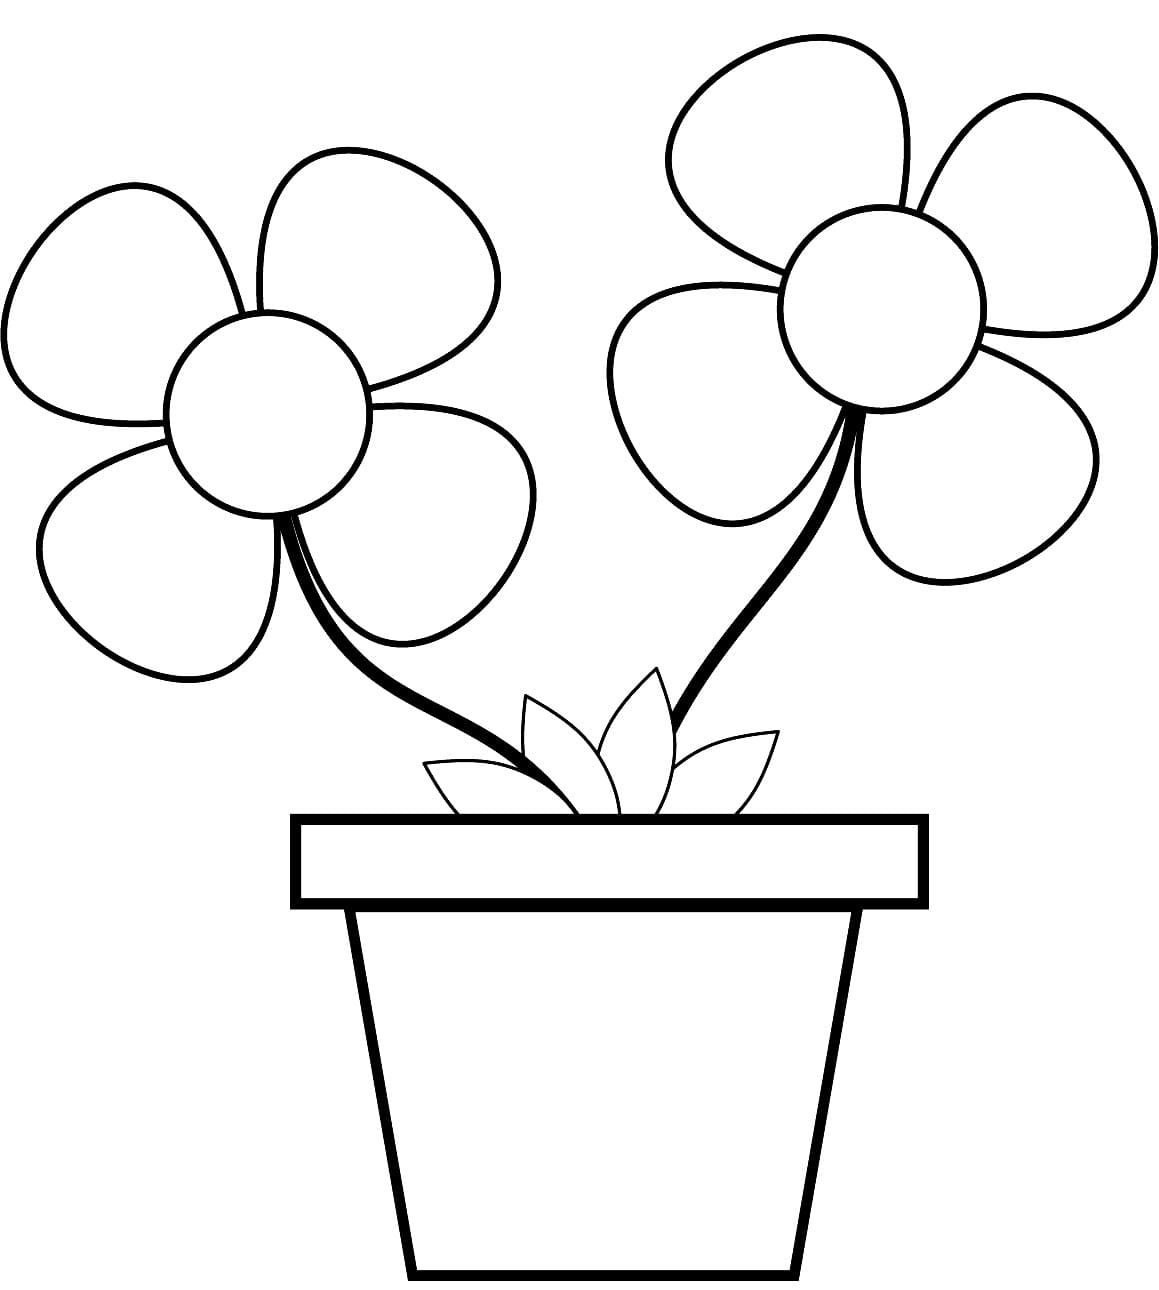 Printable Lovely Flower Pot coloring page - Download, Print or Color ...